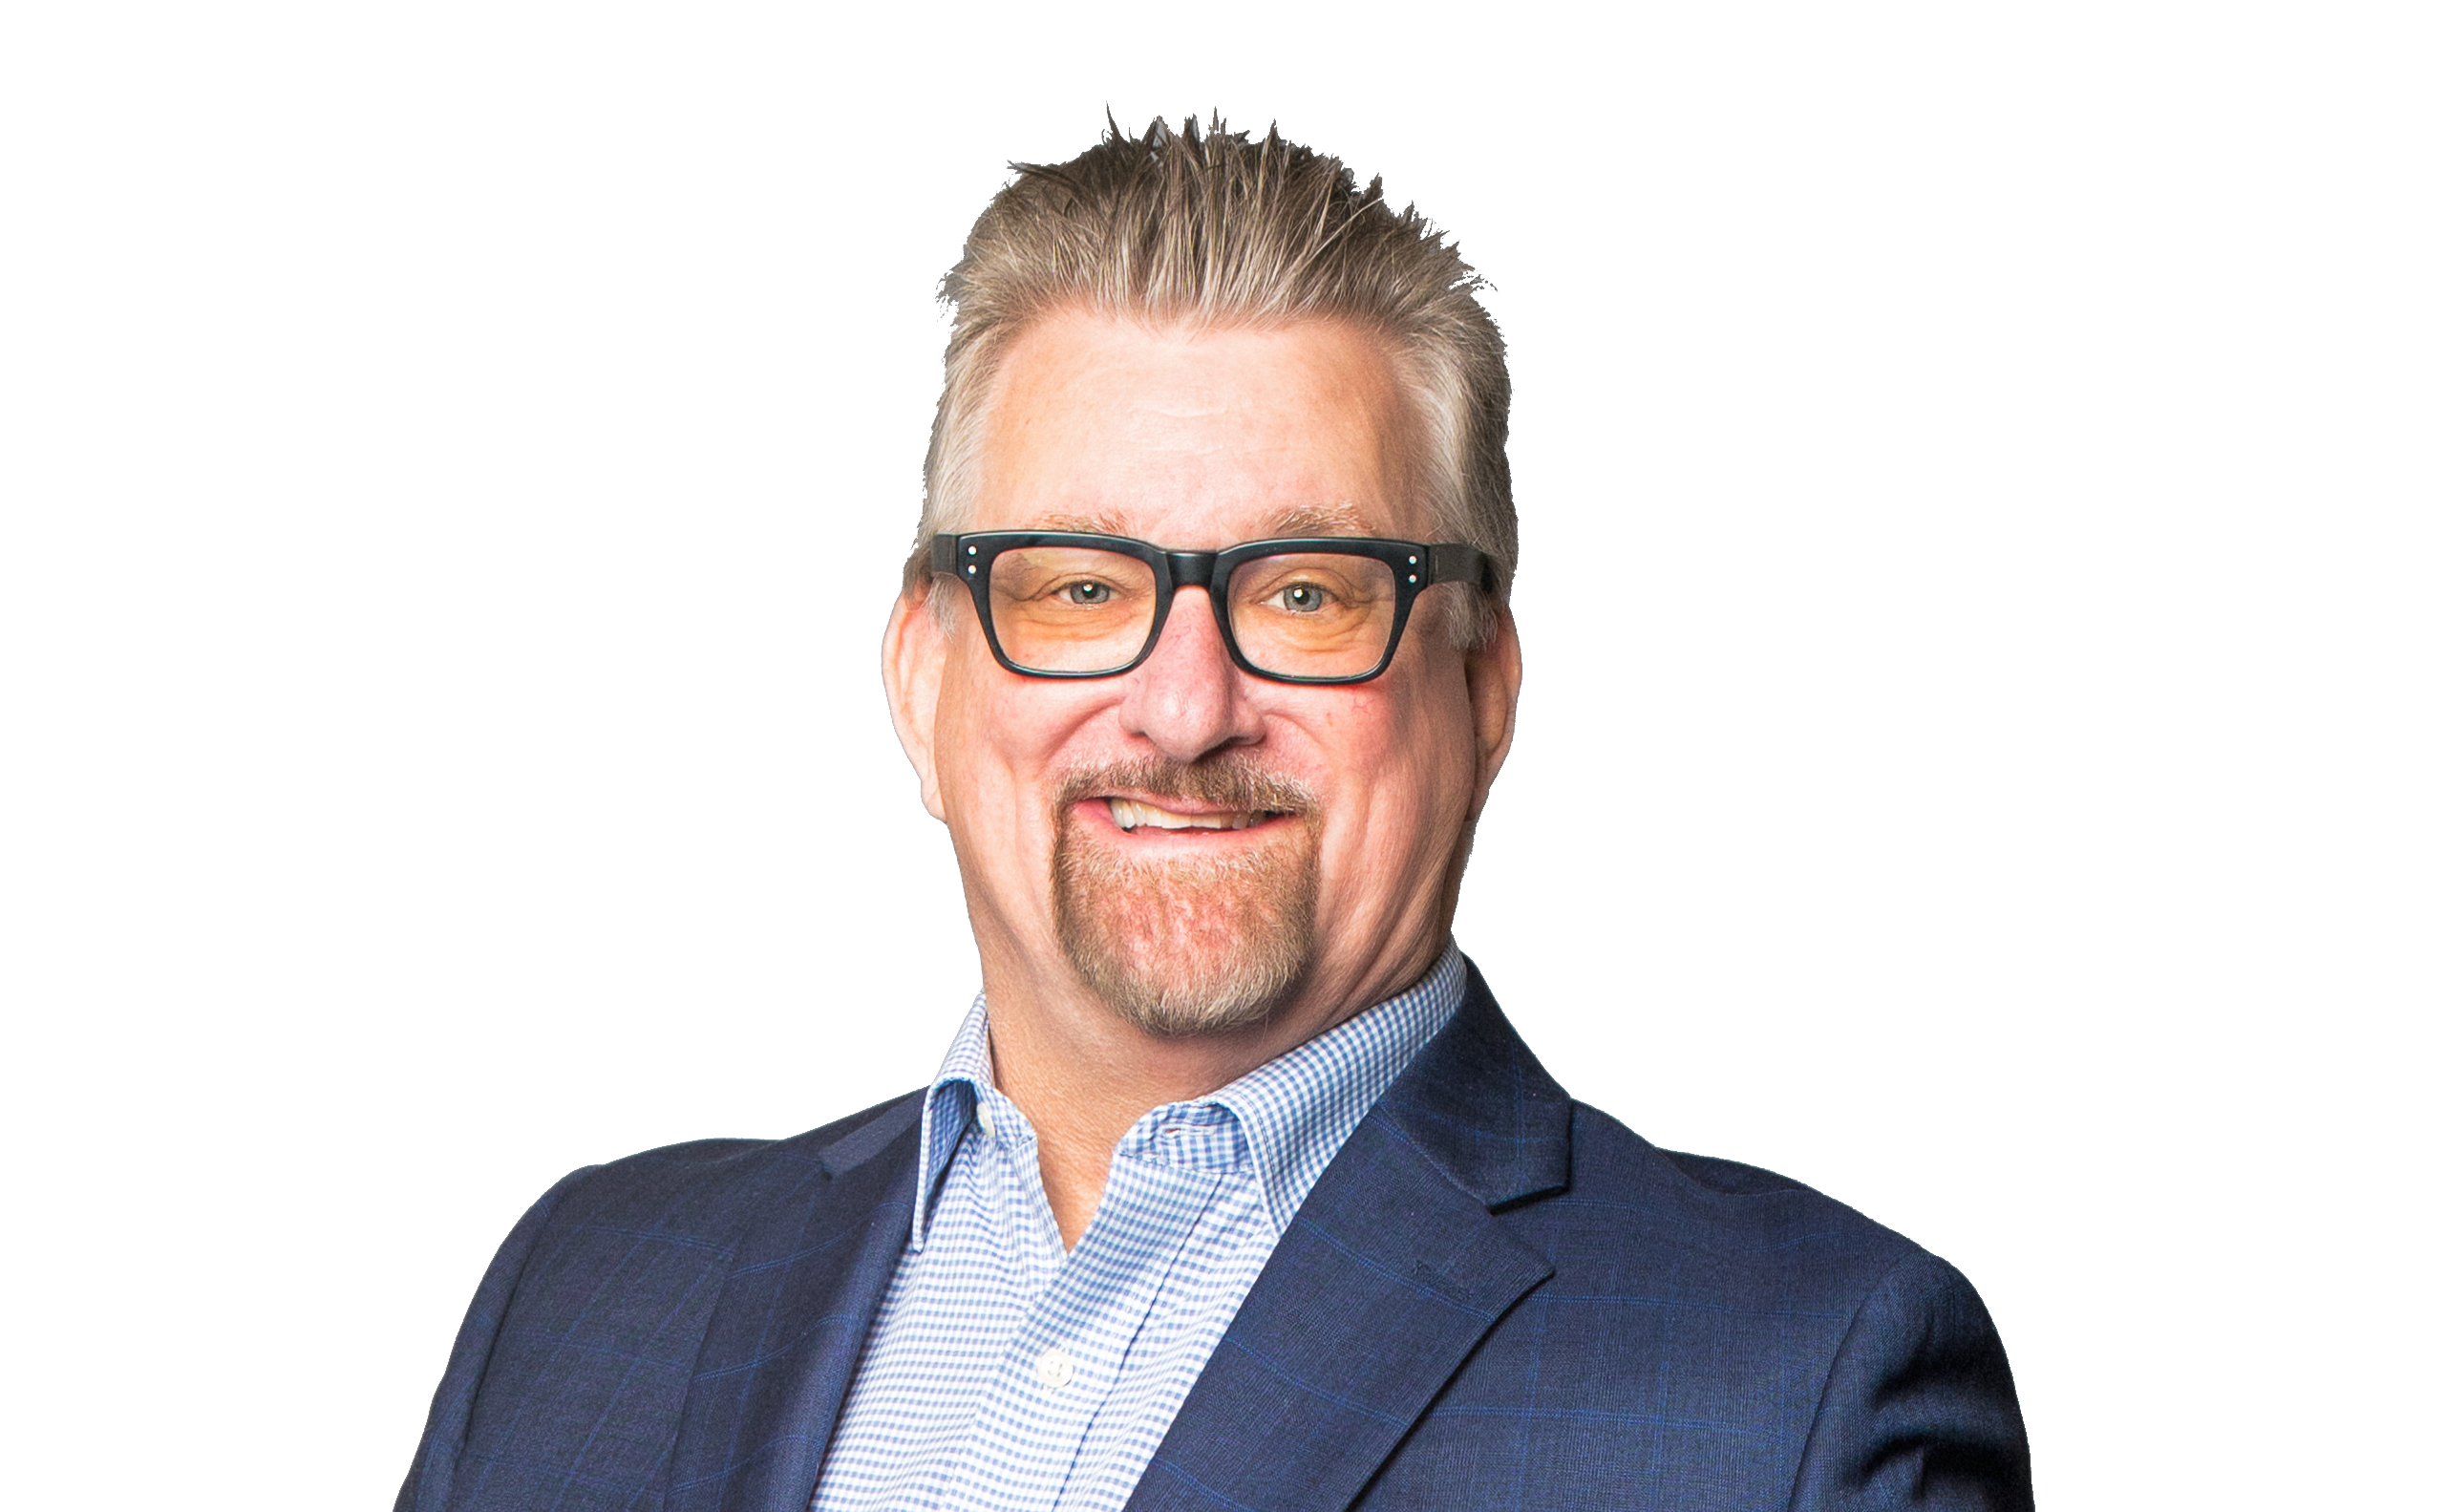 Hoar Construction Appoints Doug Storer as Director of Business Strategies